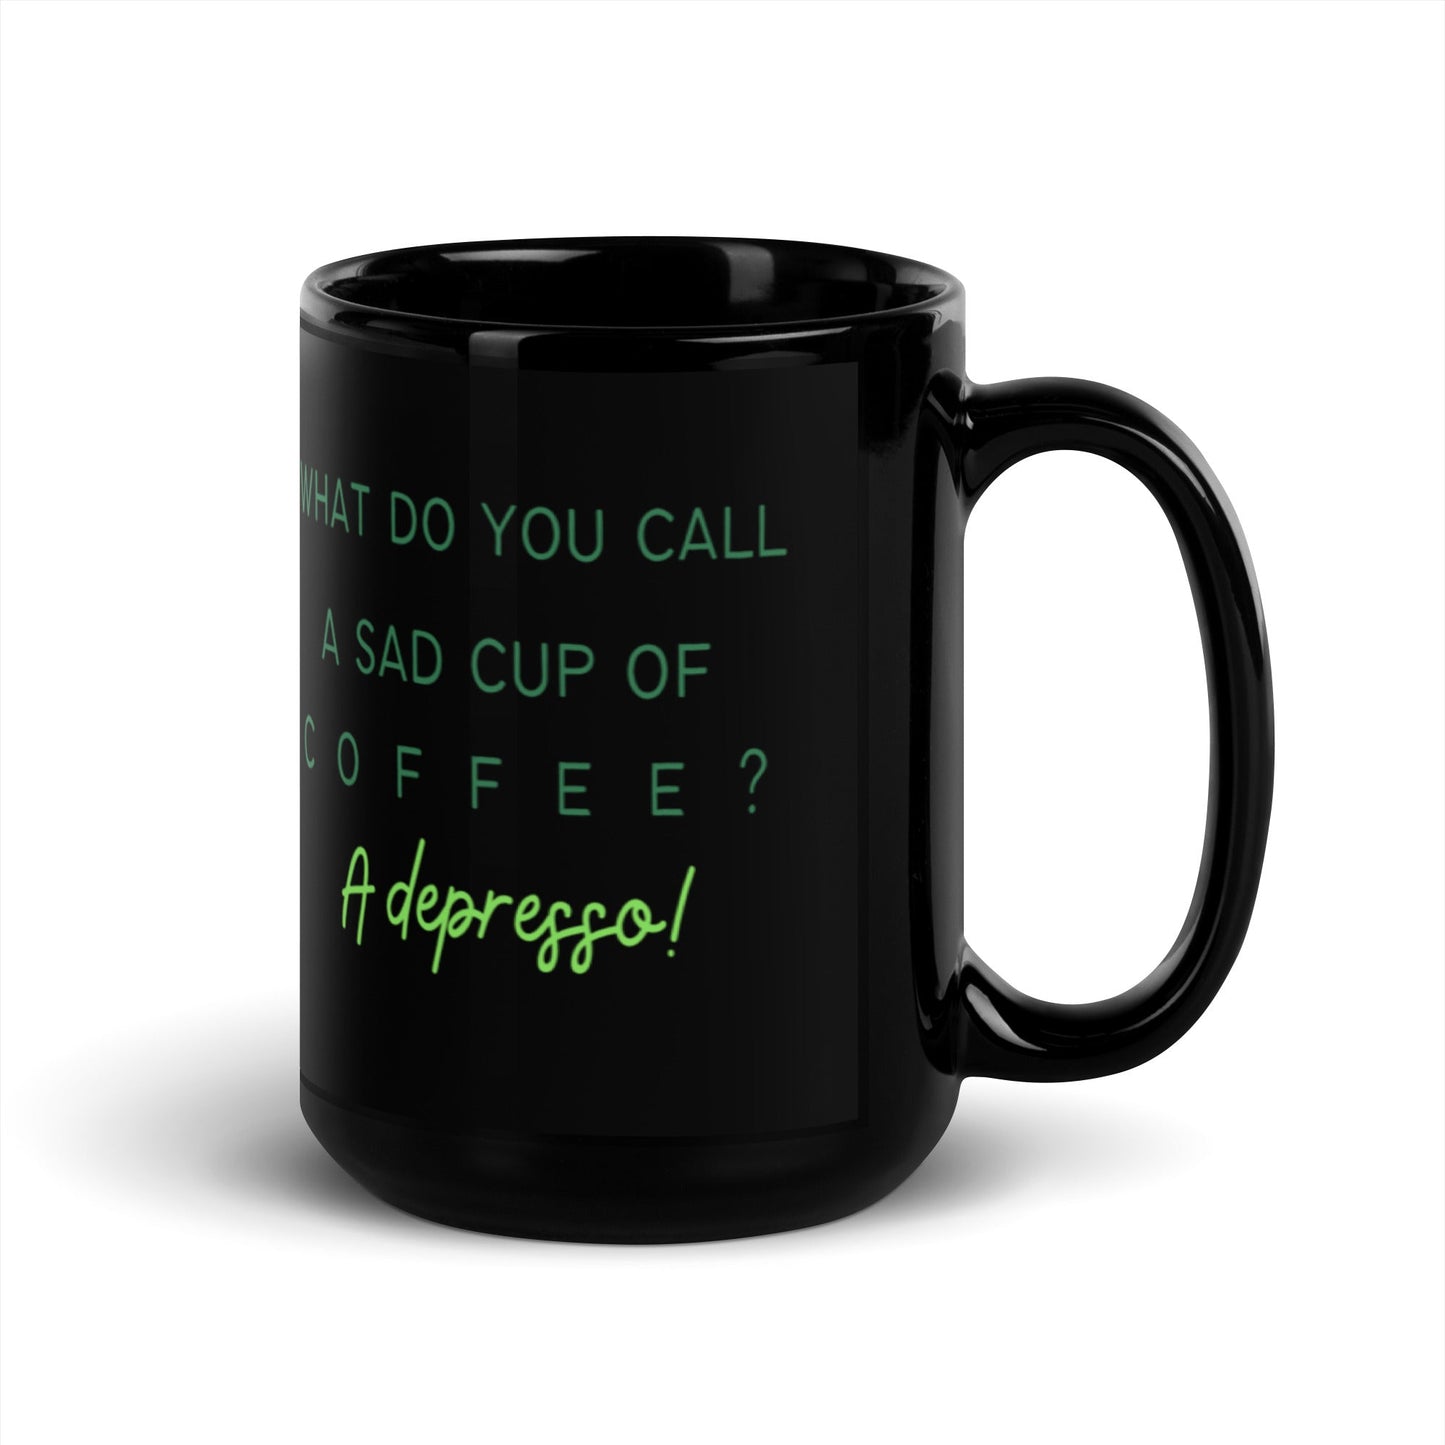 What do you call a sad cup of coffee?-Mug - Hil-arious Dads